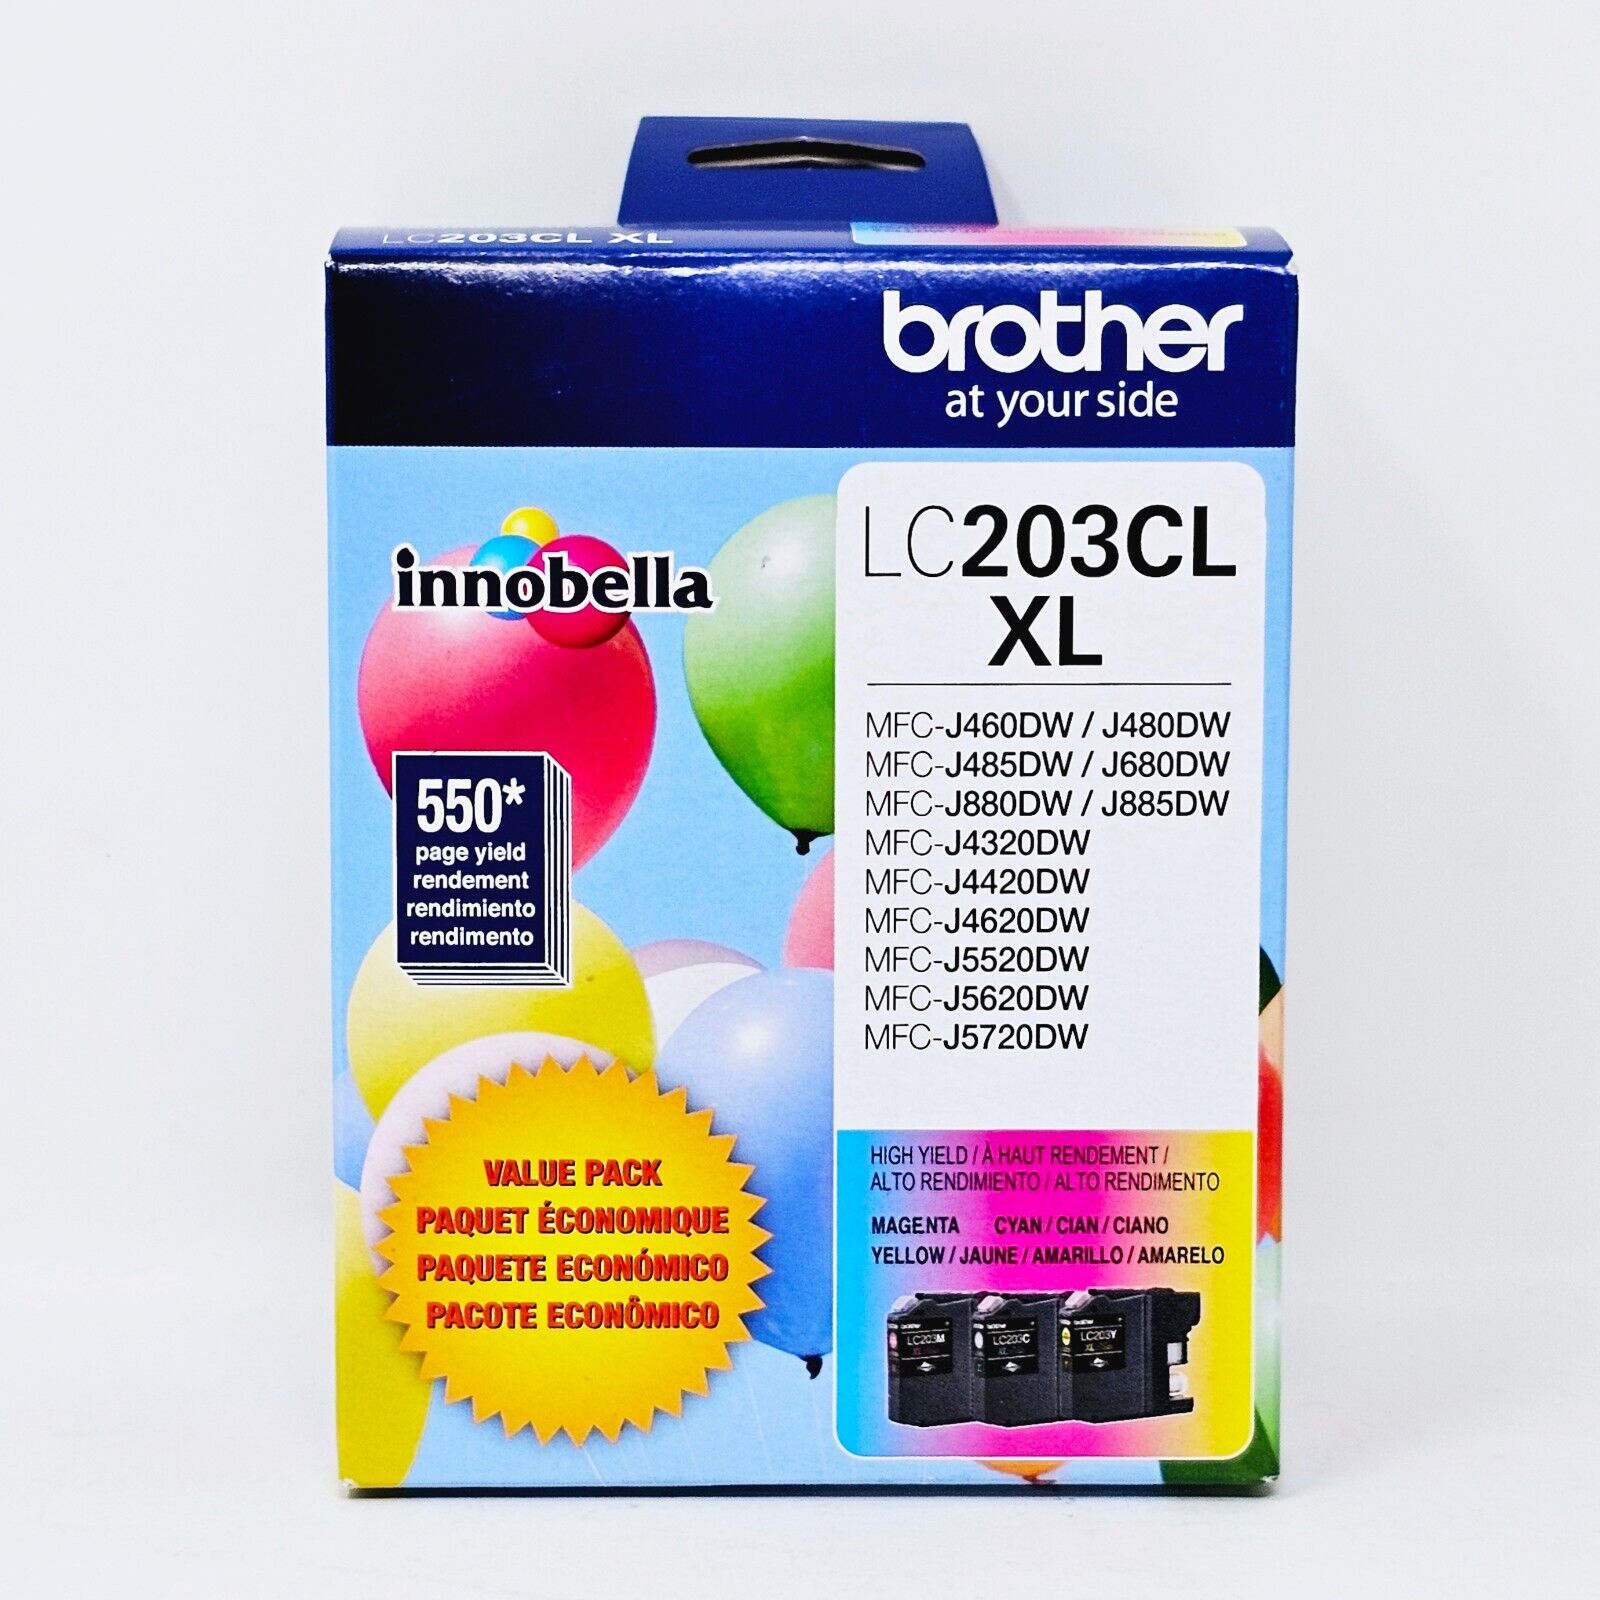 Brother LC203CL XL Ink Cartridge Brand New Sealed OEM EXP 08/2025